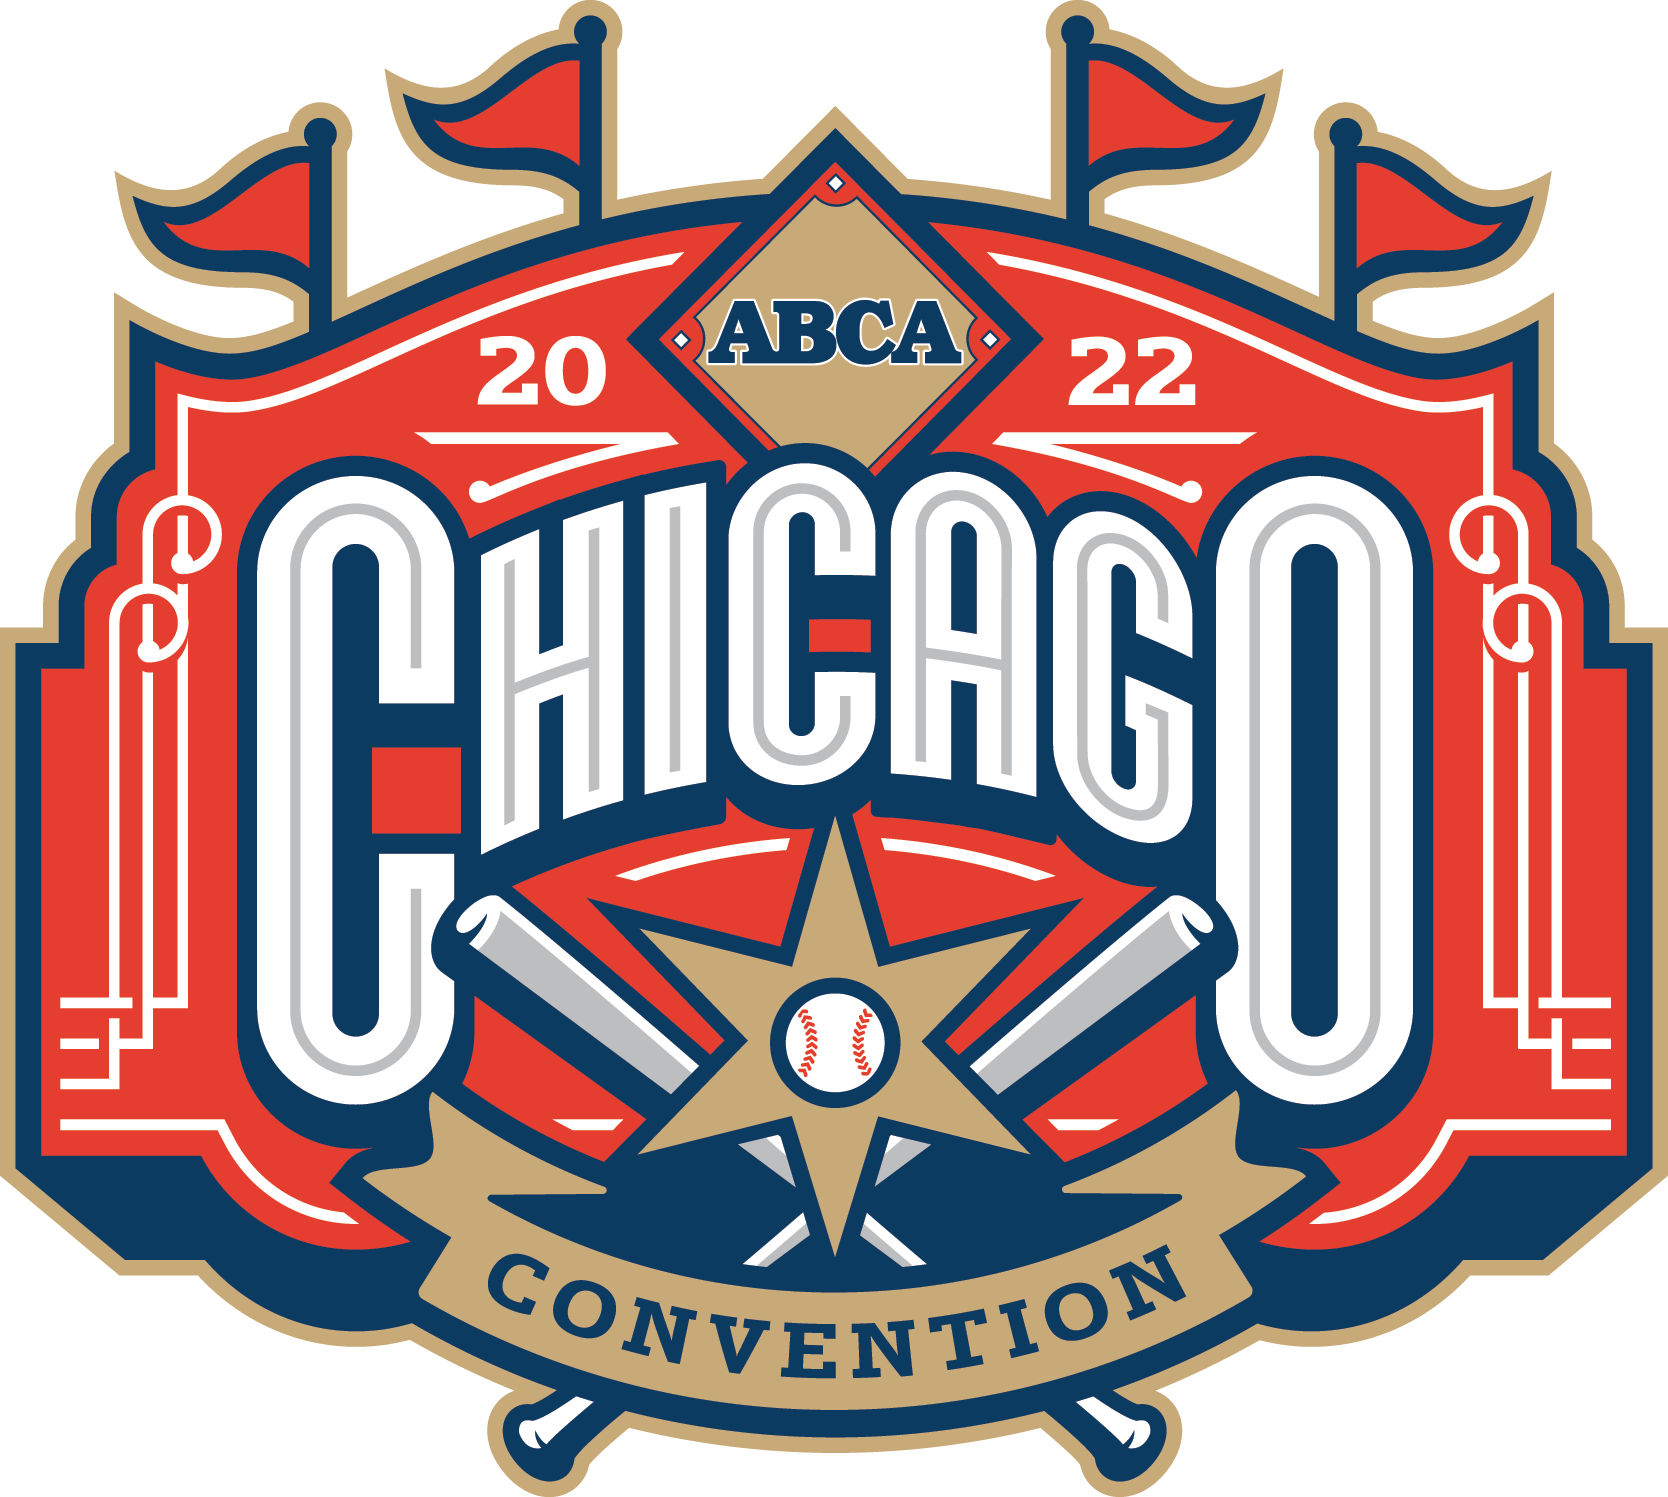 2022 ABCA Convention Logo which features a Wrigley Field scoreboard background with Chicago and 2022 on the front